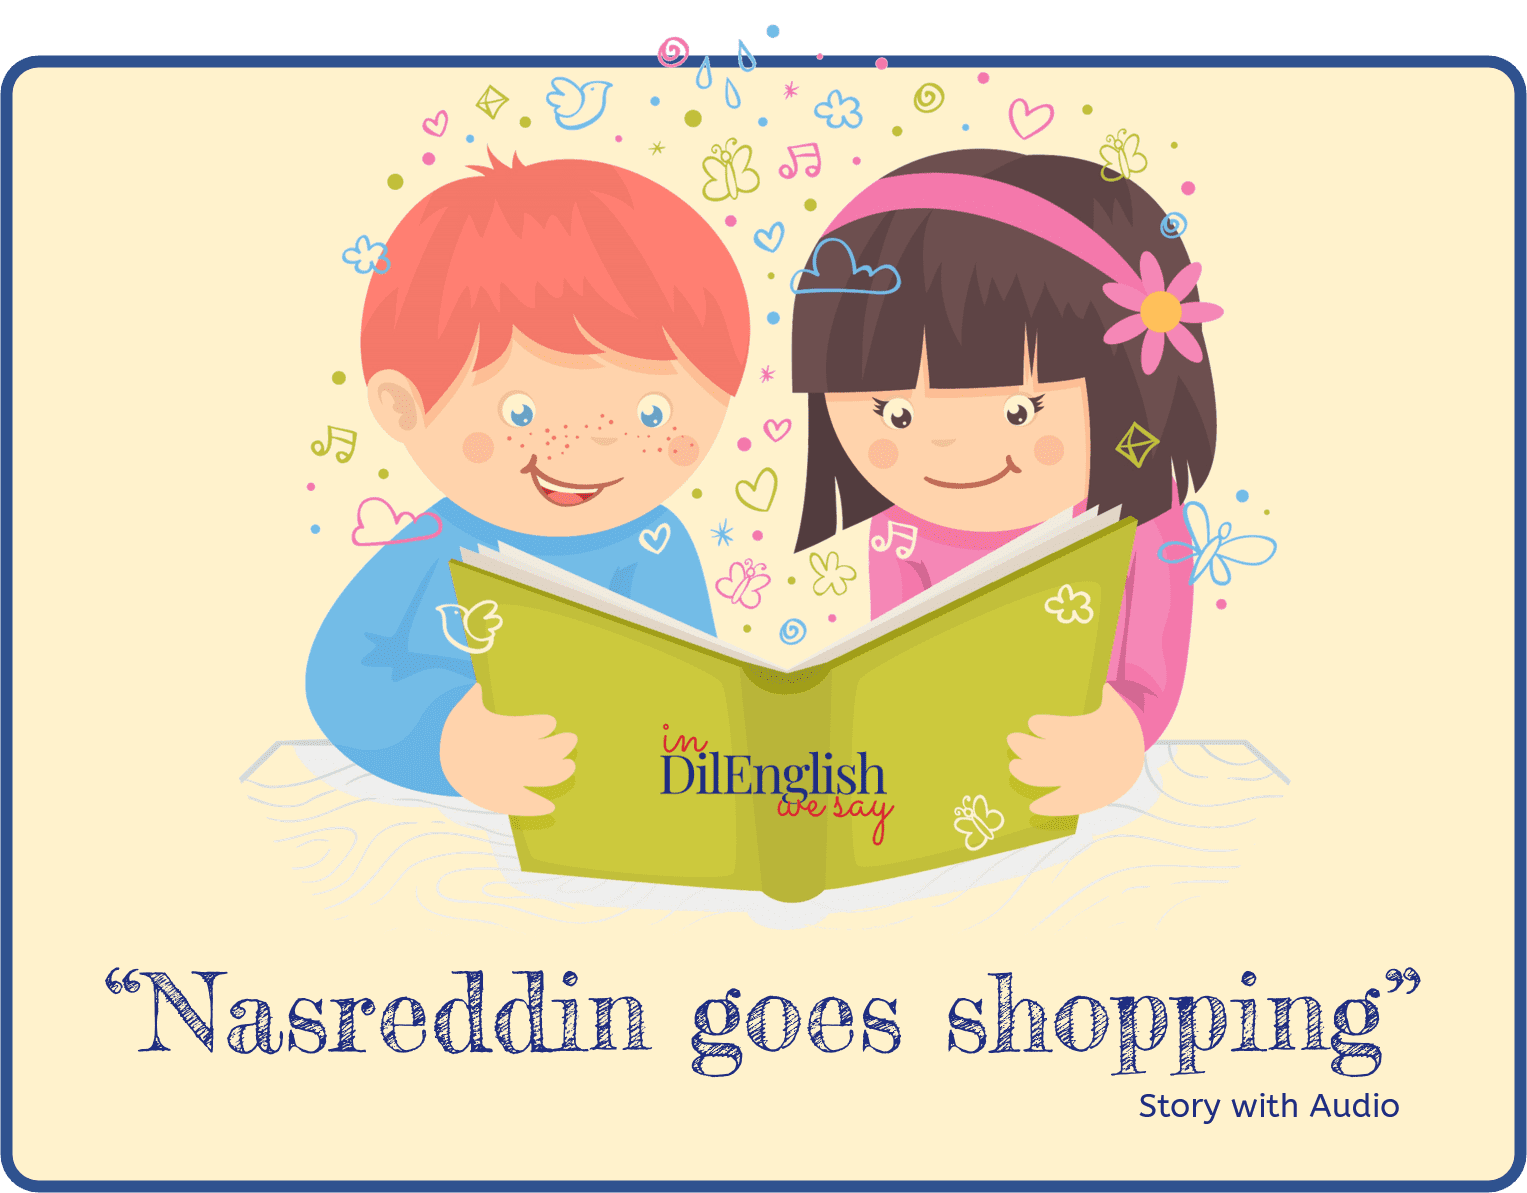 Nasreddin-goes-shopping-listen-and-read-exercise-learn-english